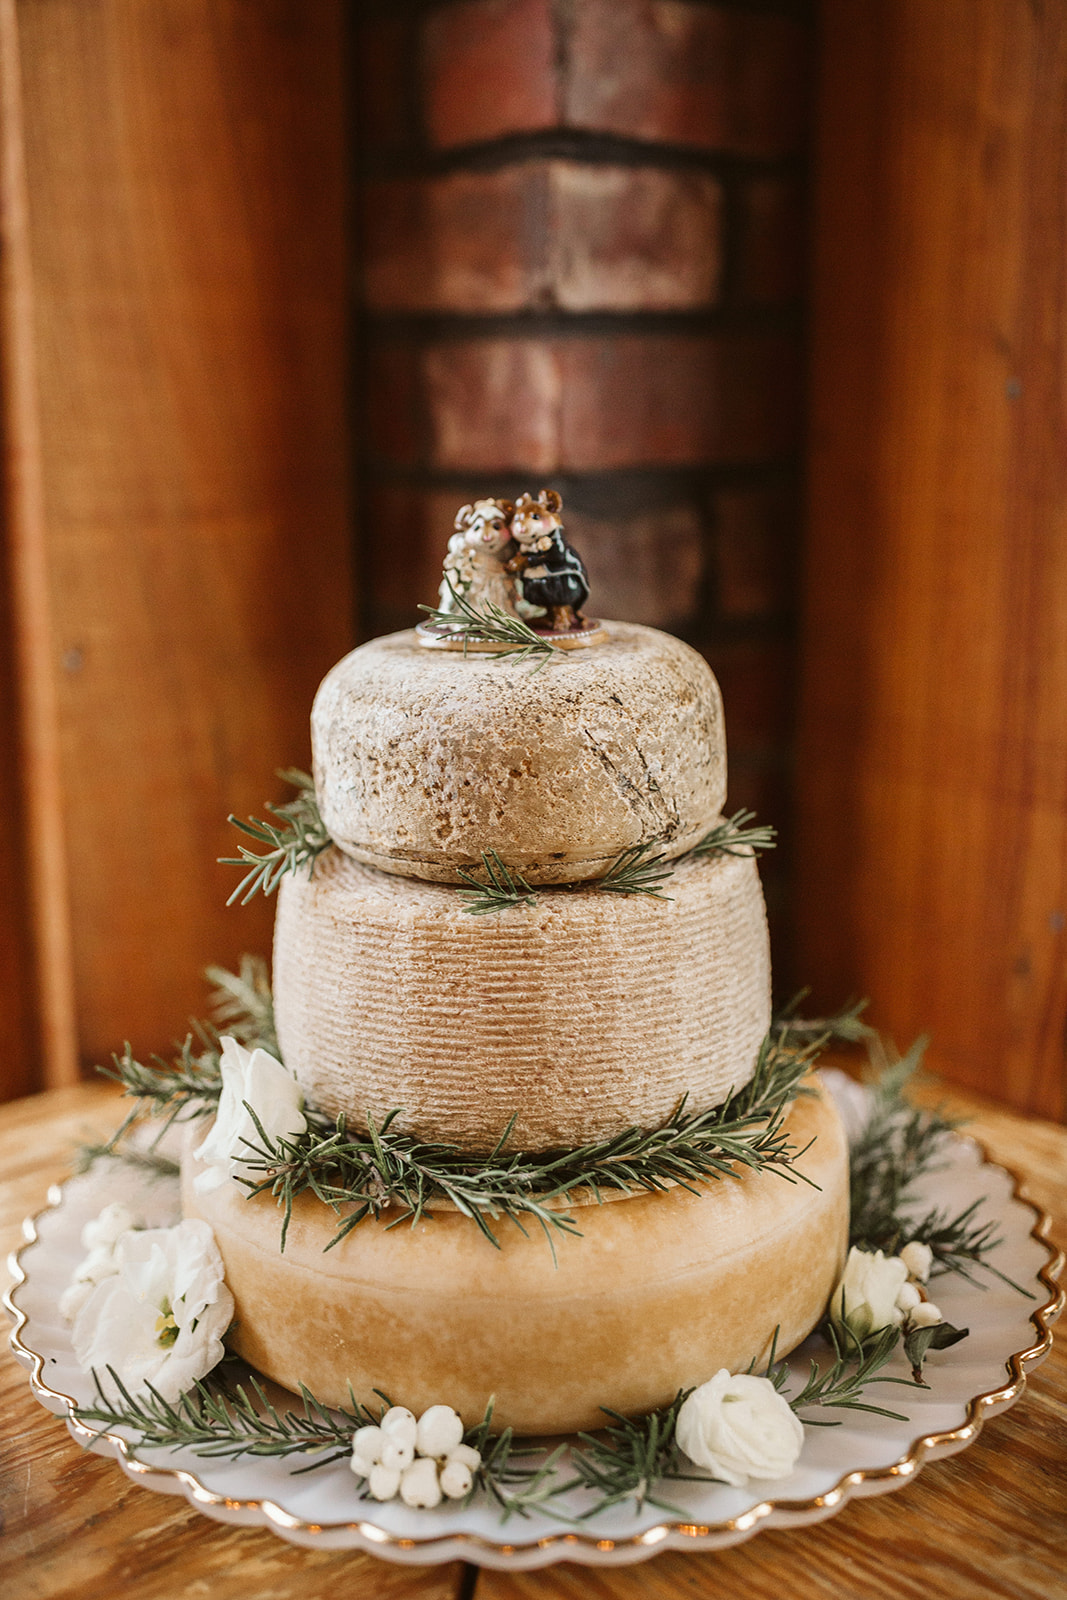 Three large cheese wheels decorated with sprigs of rosemary sit atop one another like a wedding cake.